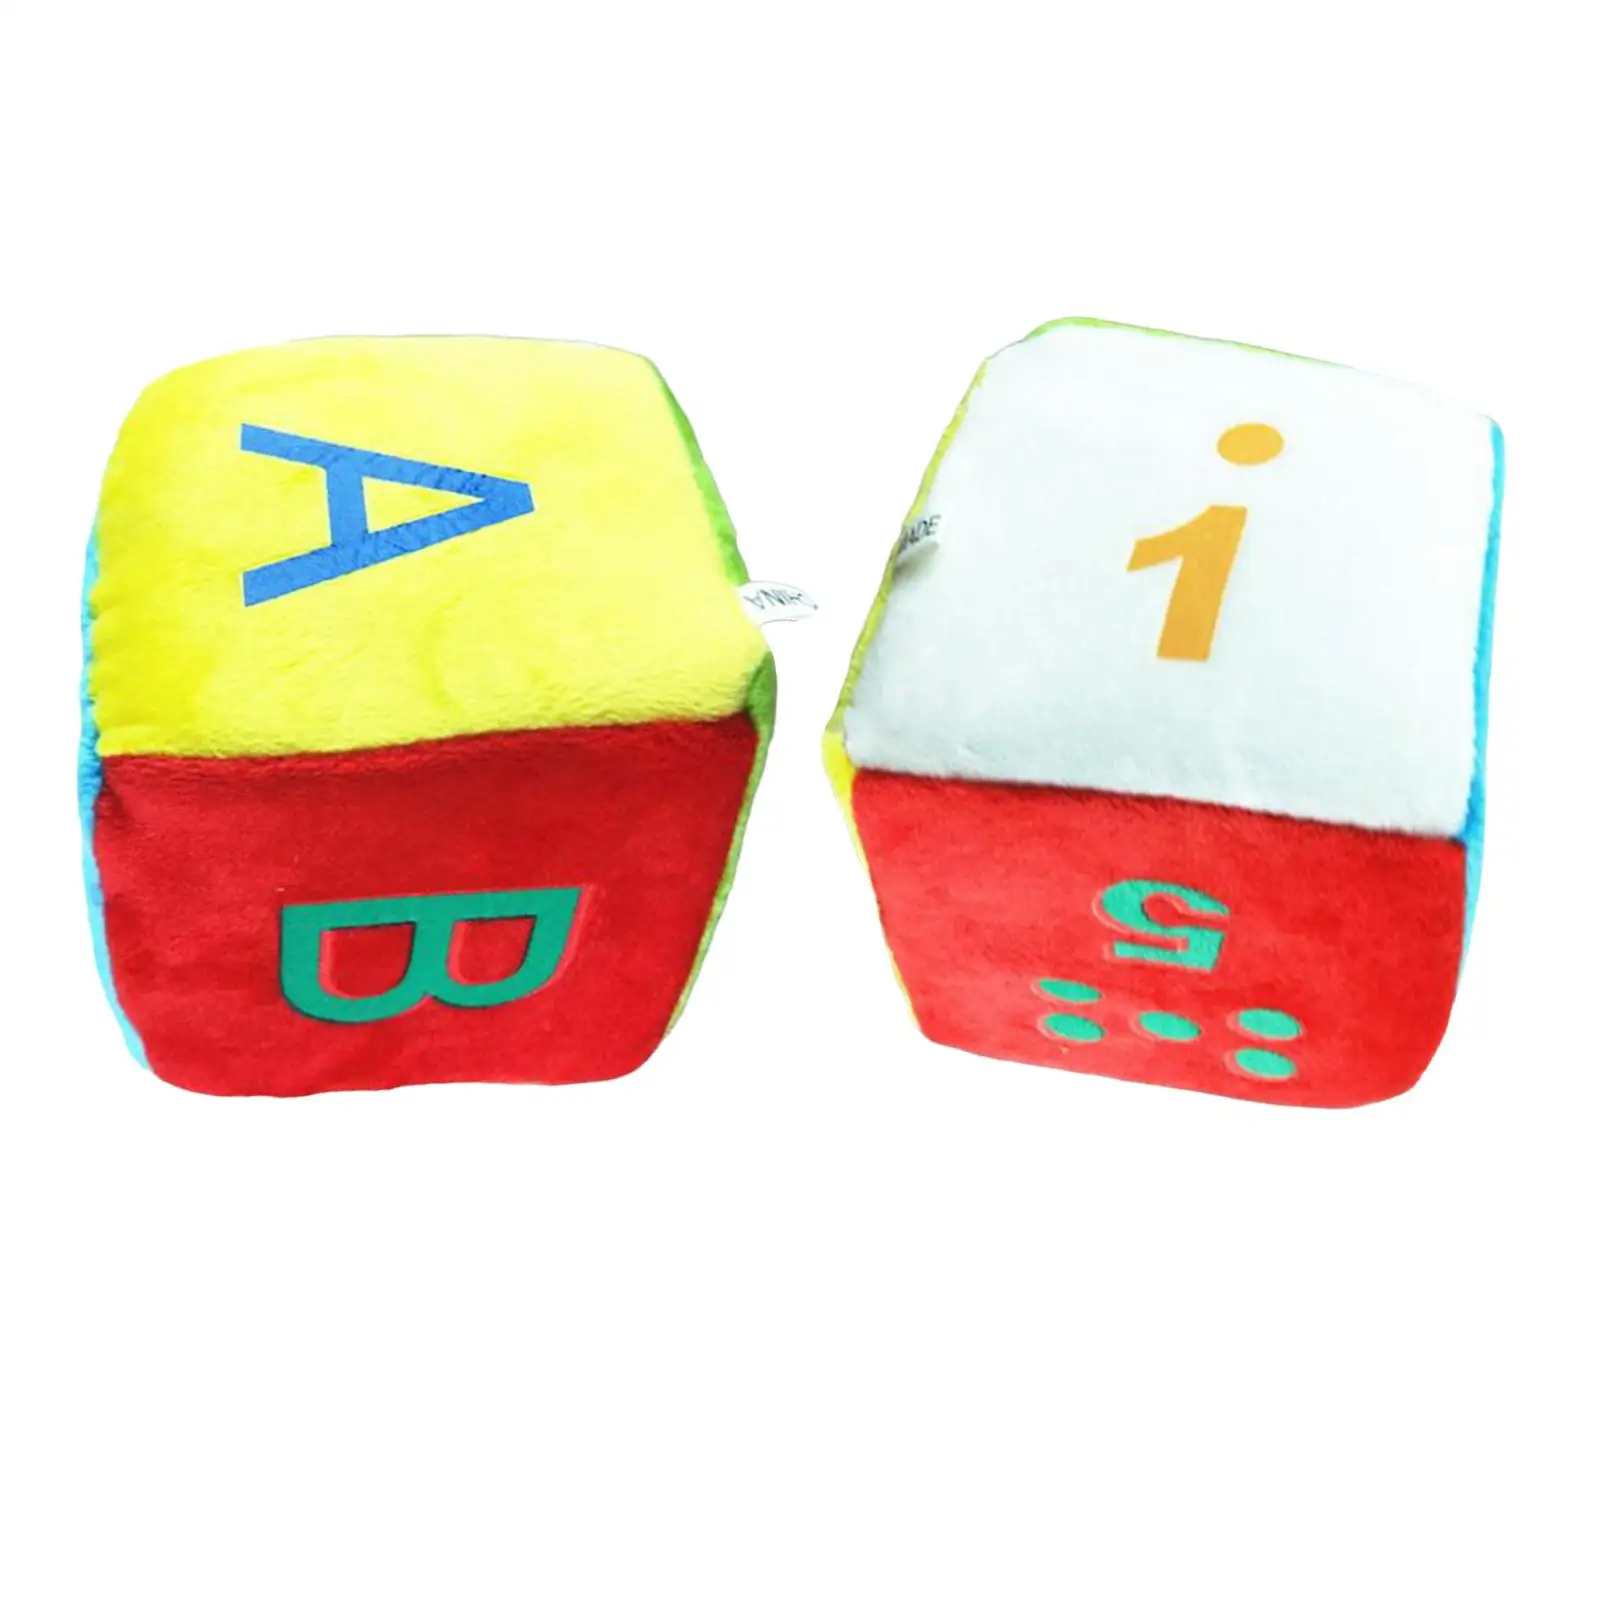 

10cm Dices Toys Soft Plush Early Educational Toys for Classrooms Home Party Favors Playing Games Holiday